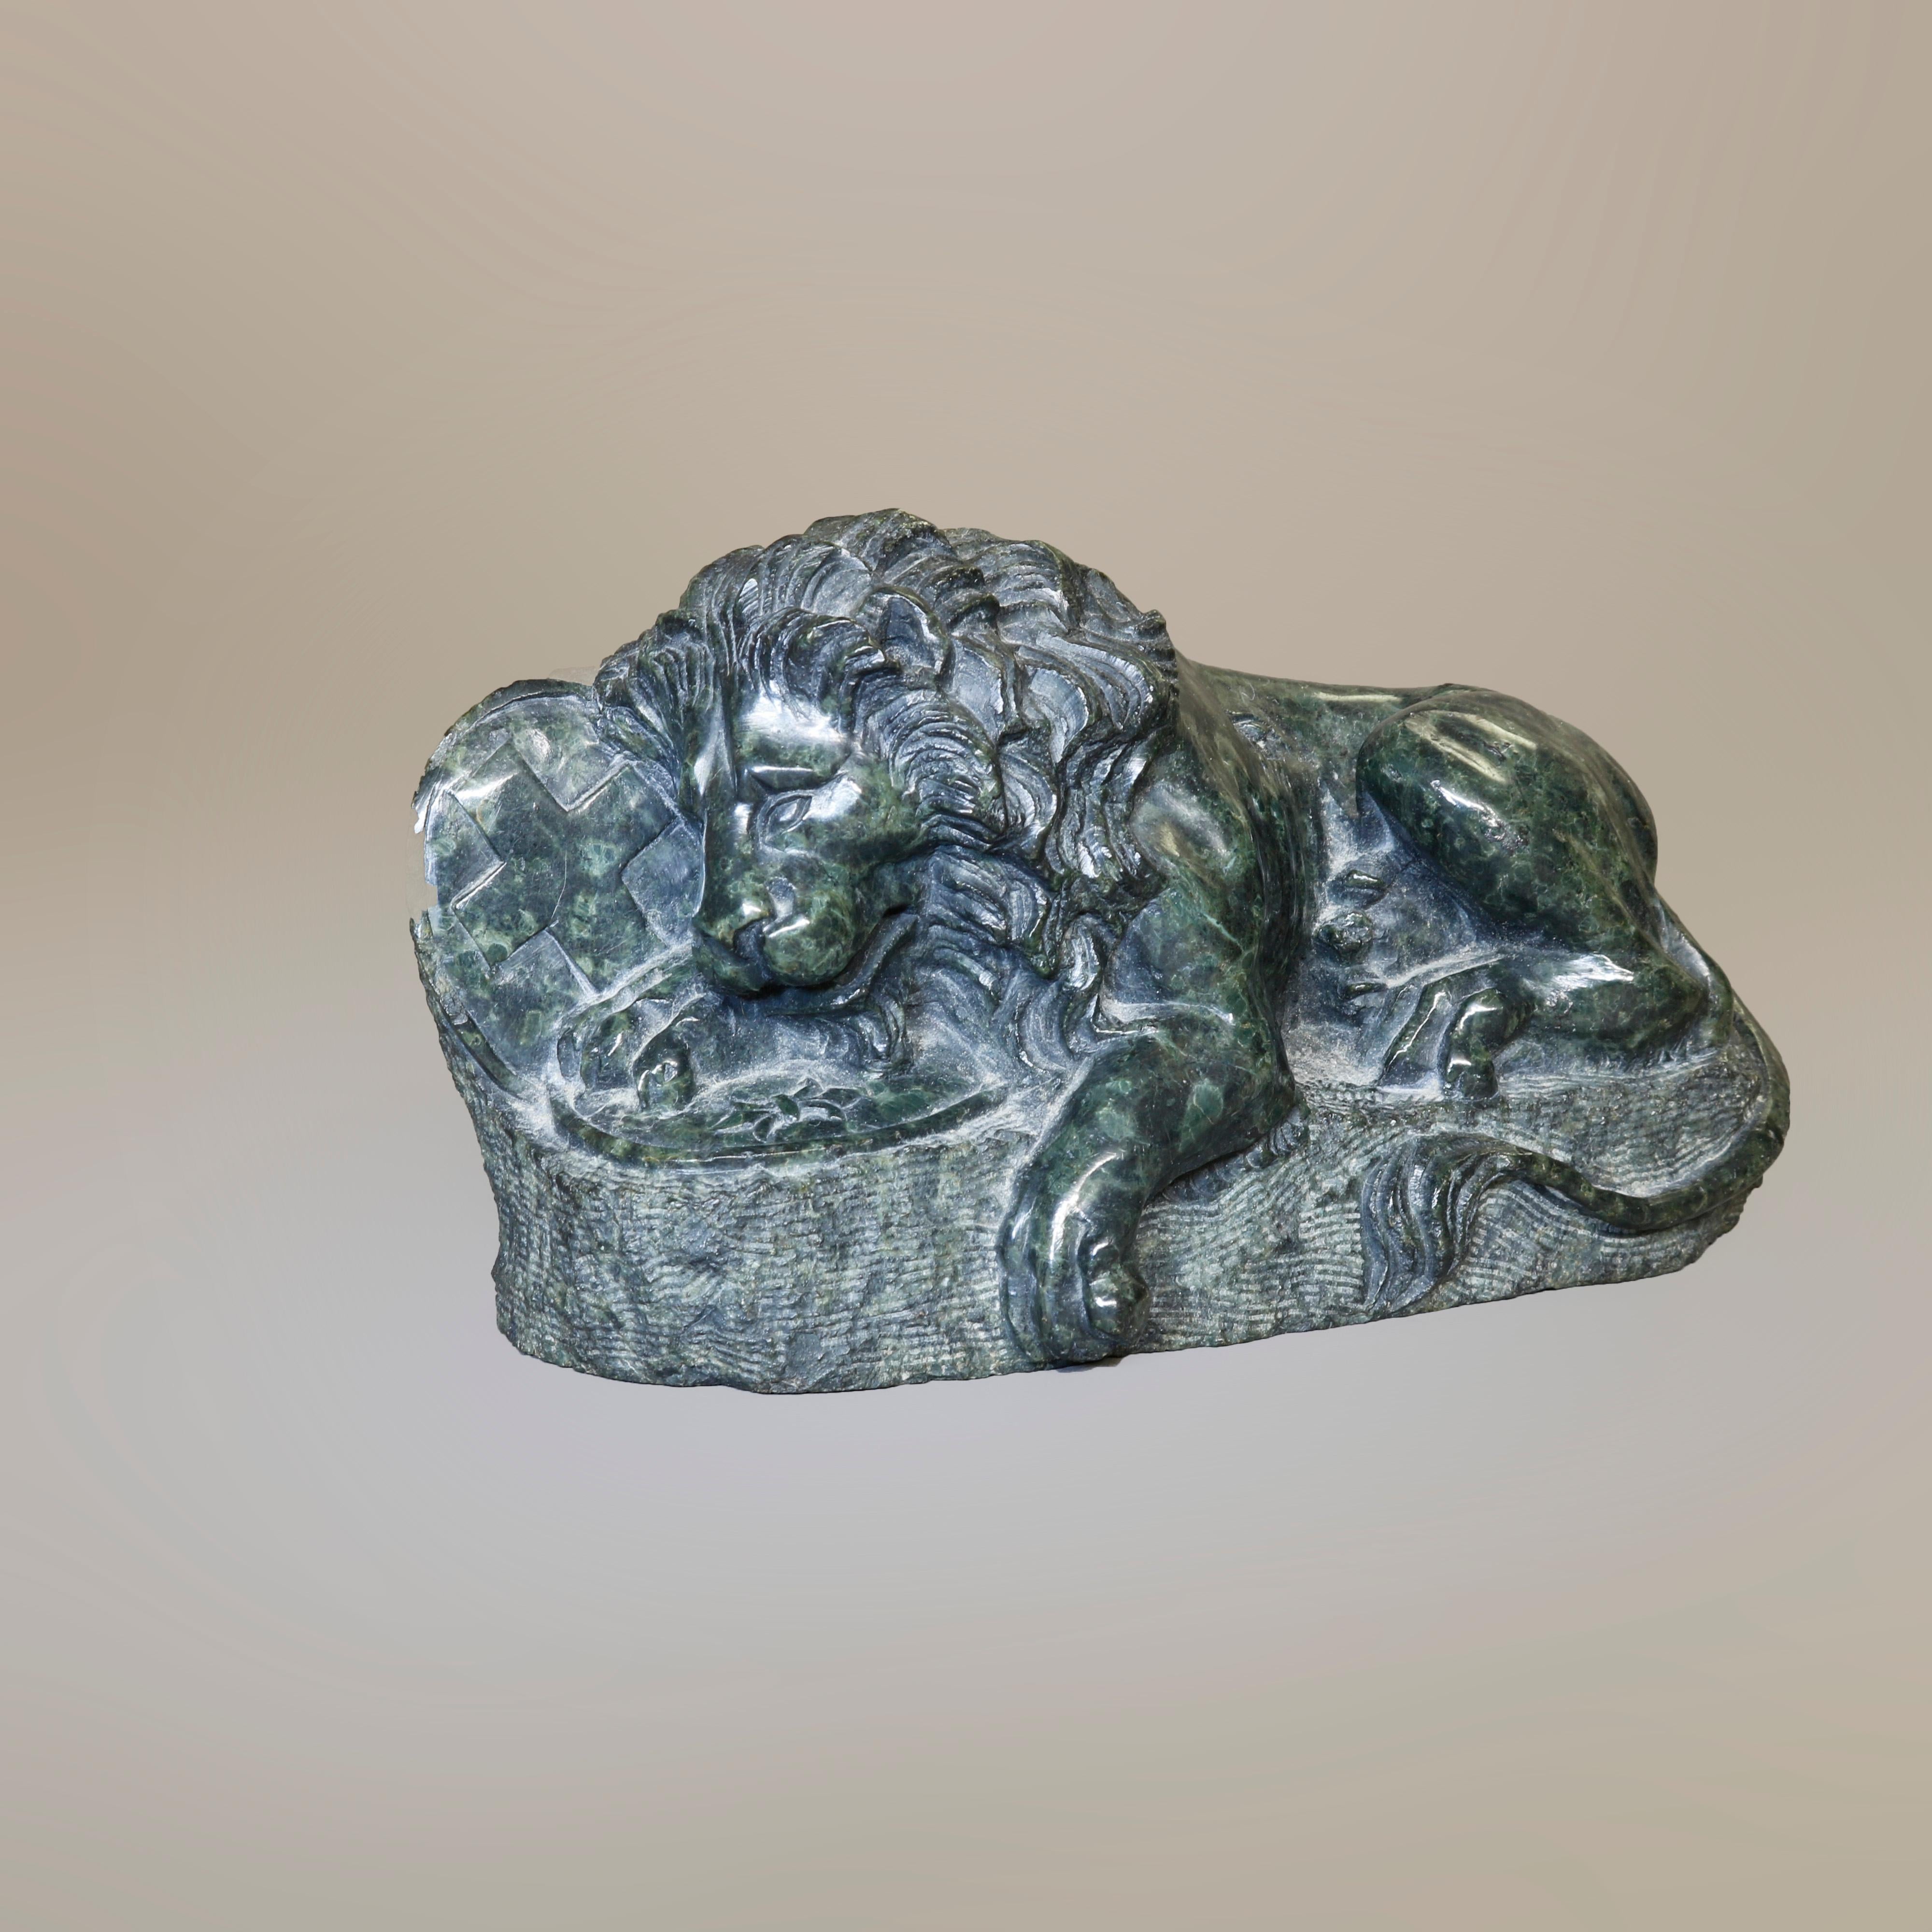 A Chinese hand carved victory sculpture depicts lion resting against shield, 20th century

Measures - 3.5''H x 6.25''W x 2.5''D.